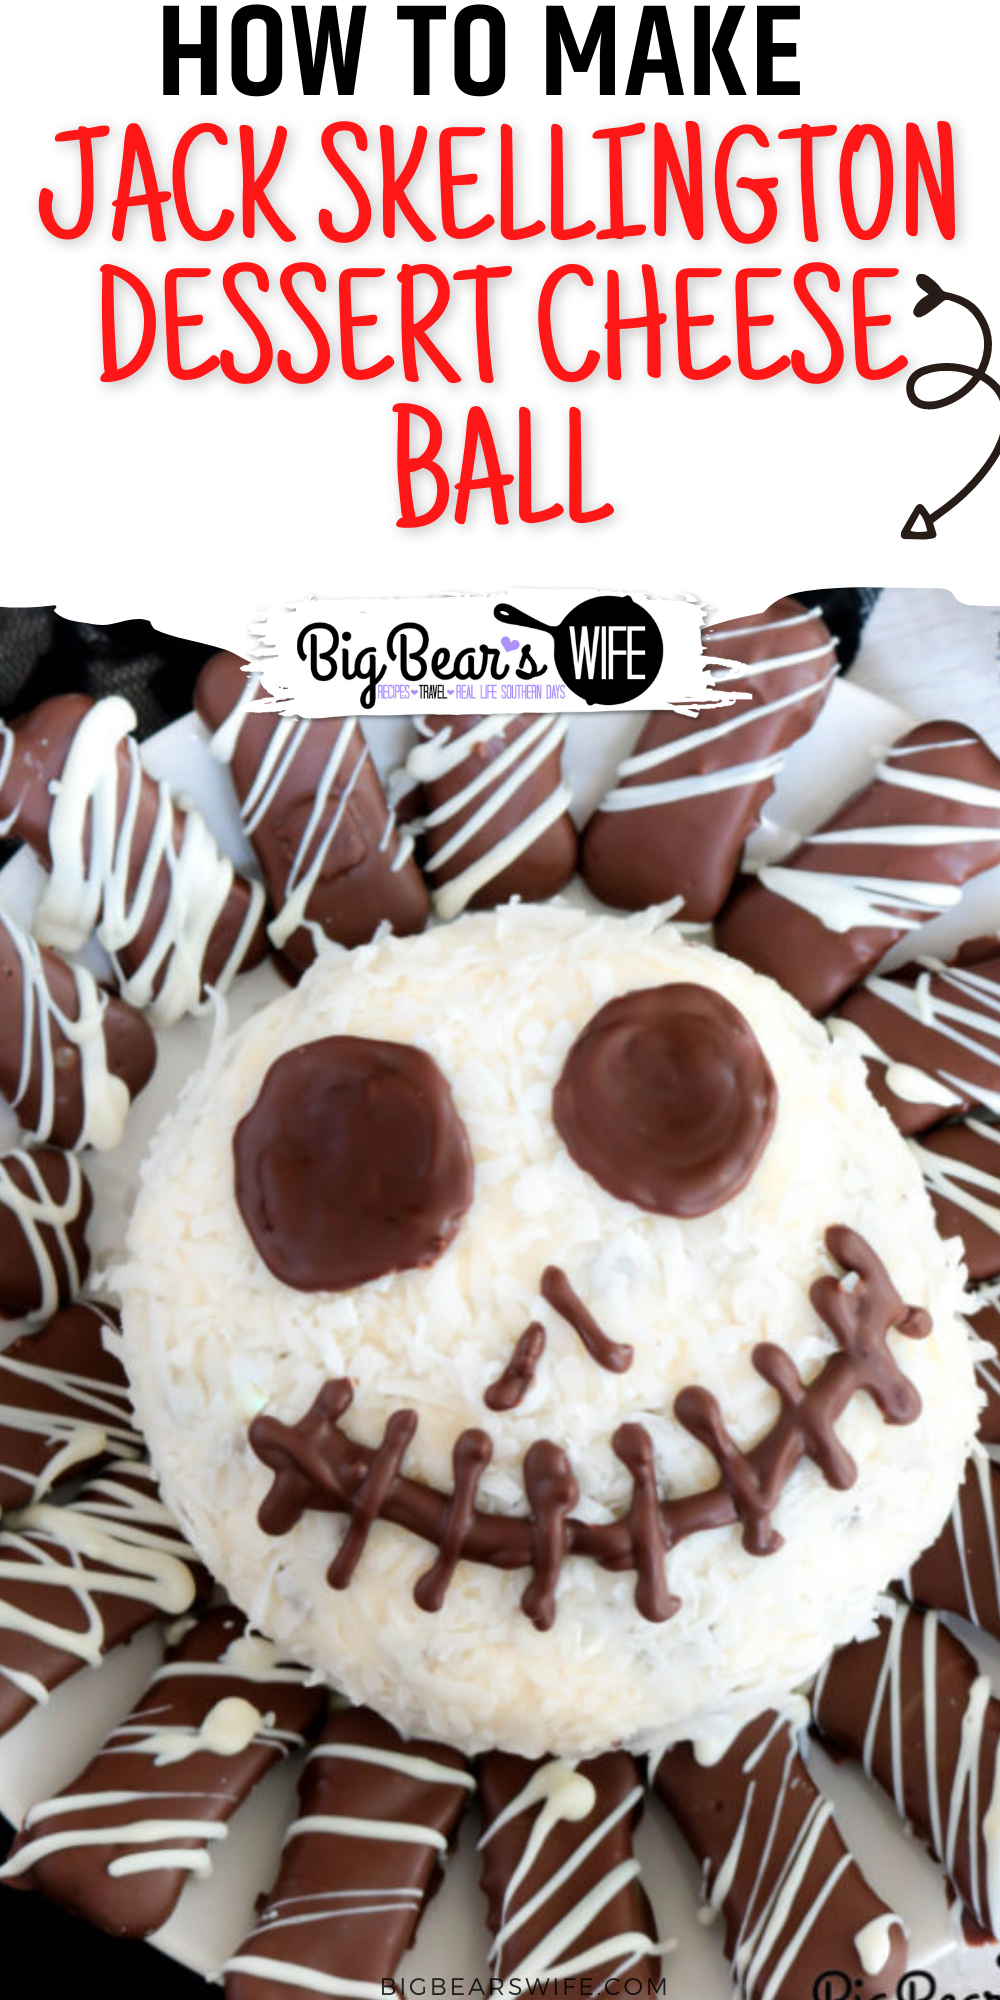 In love with The Nightmare Before Christmas and Dessert? Well this Jack Skellington Dessert Cheese Ball is for you! The Pumpkin King is transformed into a frightfully tasty cheese ball for the perfect Halloween party treat! via @bigbearswife